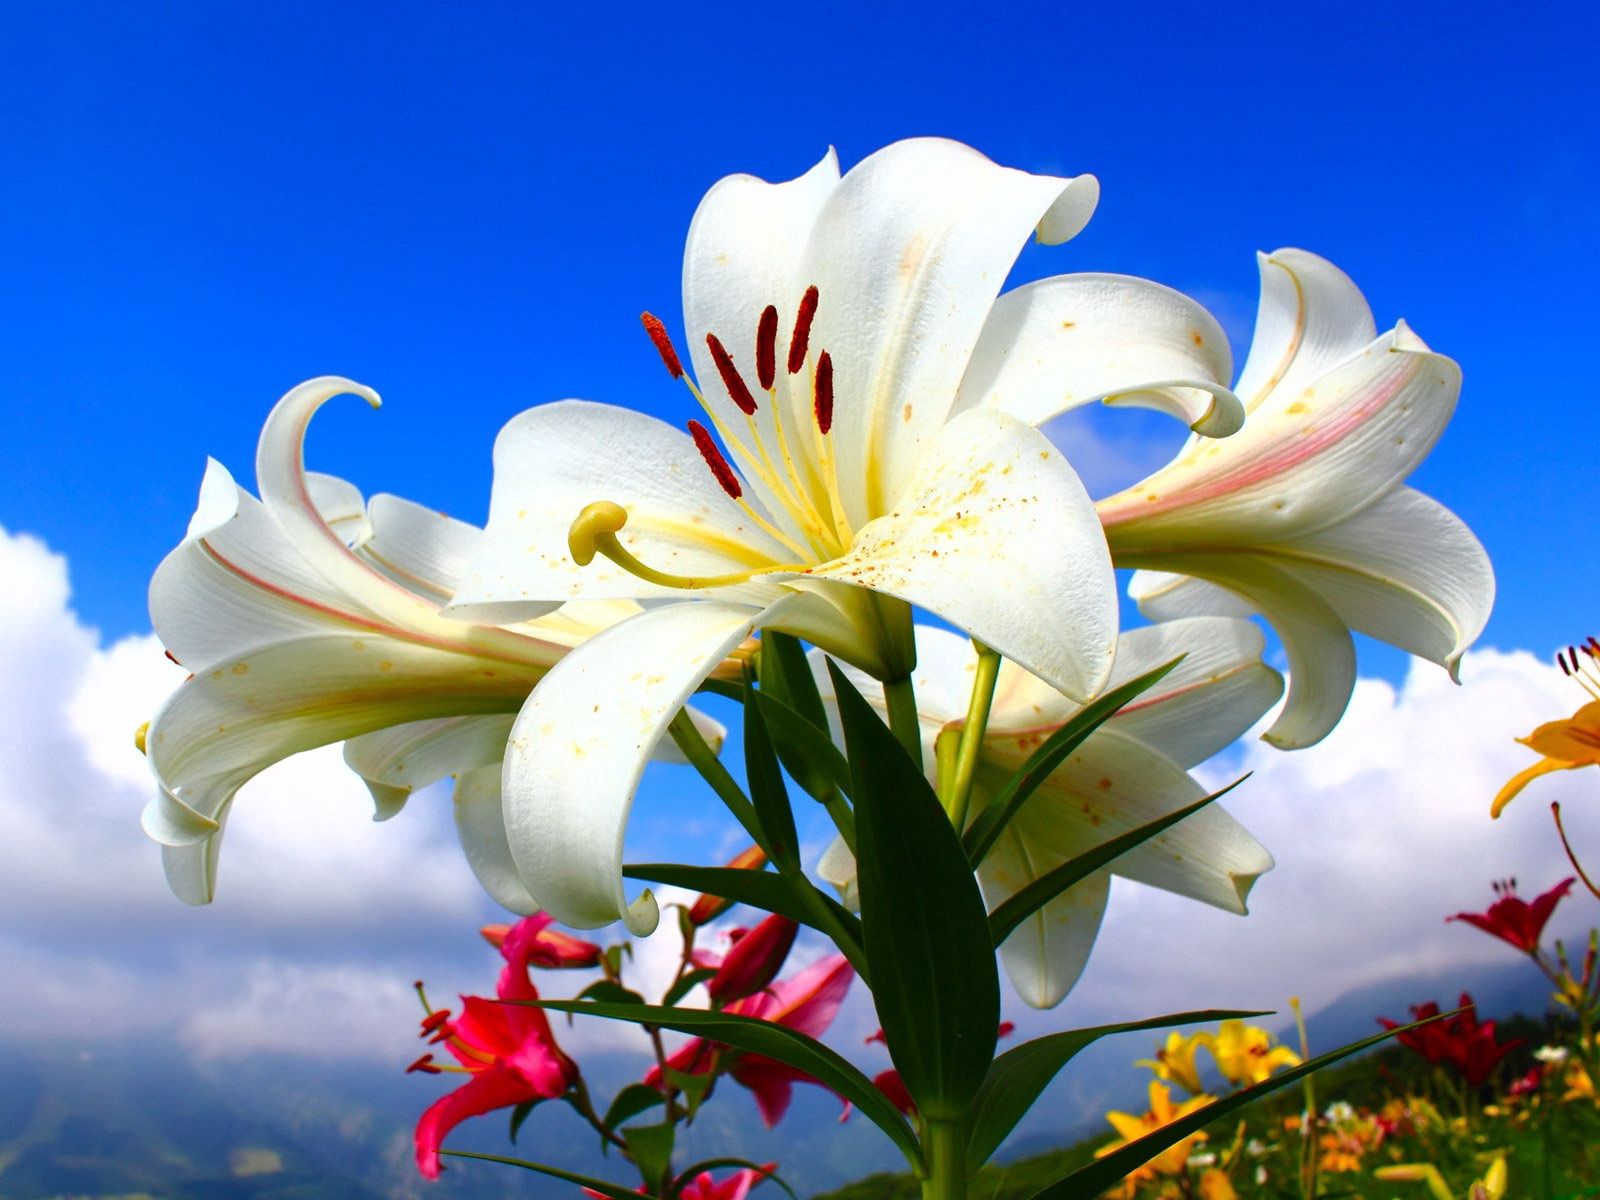 Lot flowers, sky, clouds, lilies Free Stock Photos